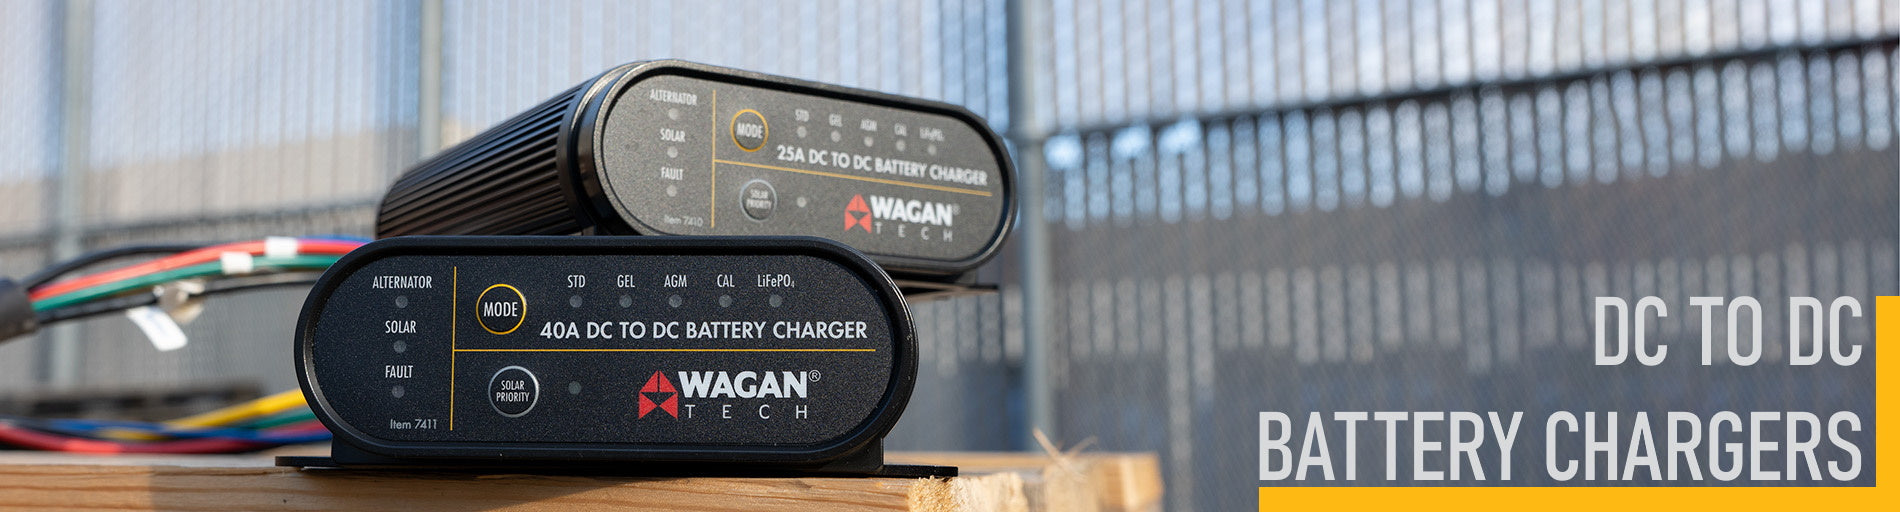 DC to DC BATTERY CHARGER